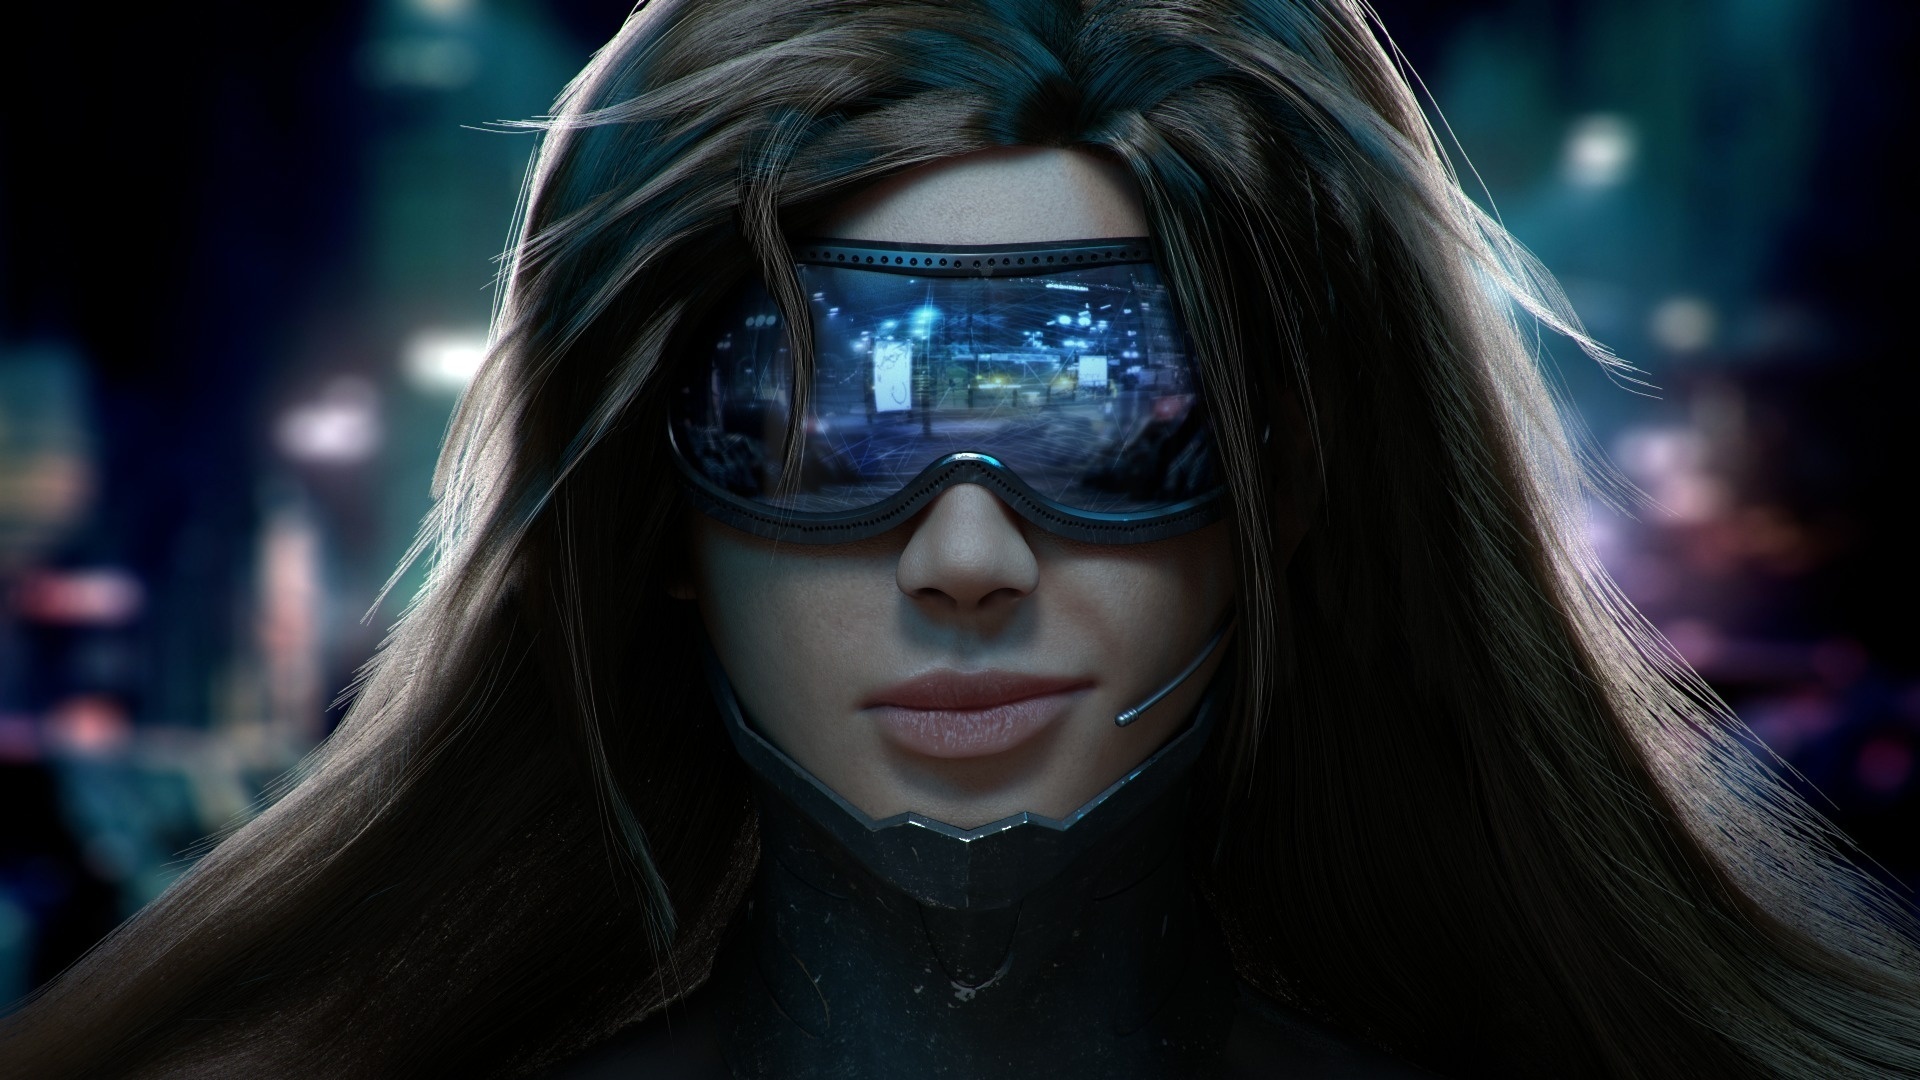 Wallpaper | 3D wallpapers | photo | picture | girl, face, glasses, cyberpunk,  Lips